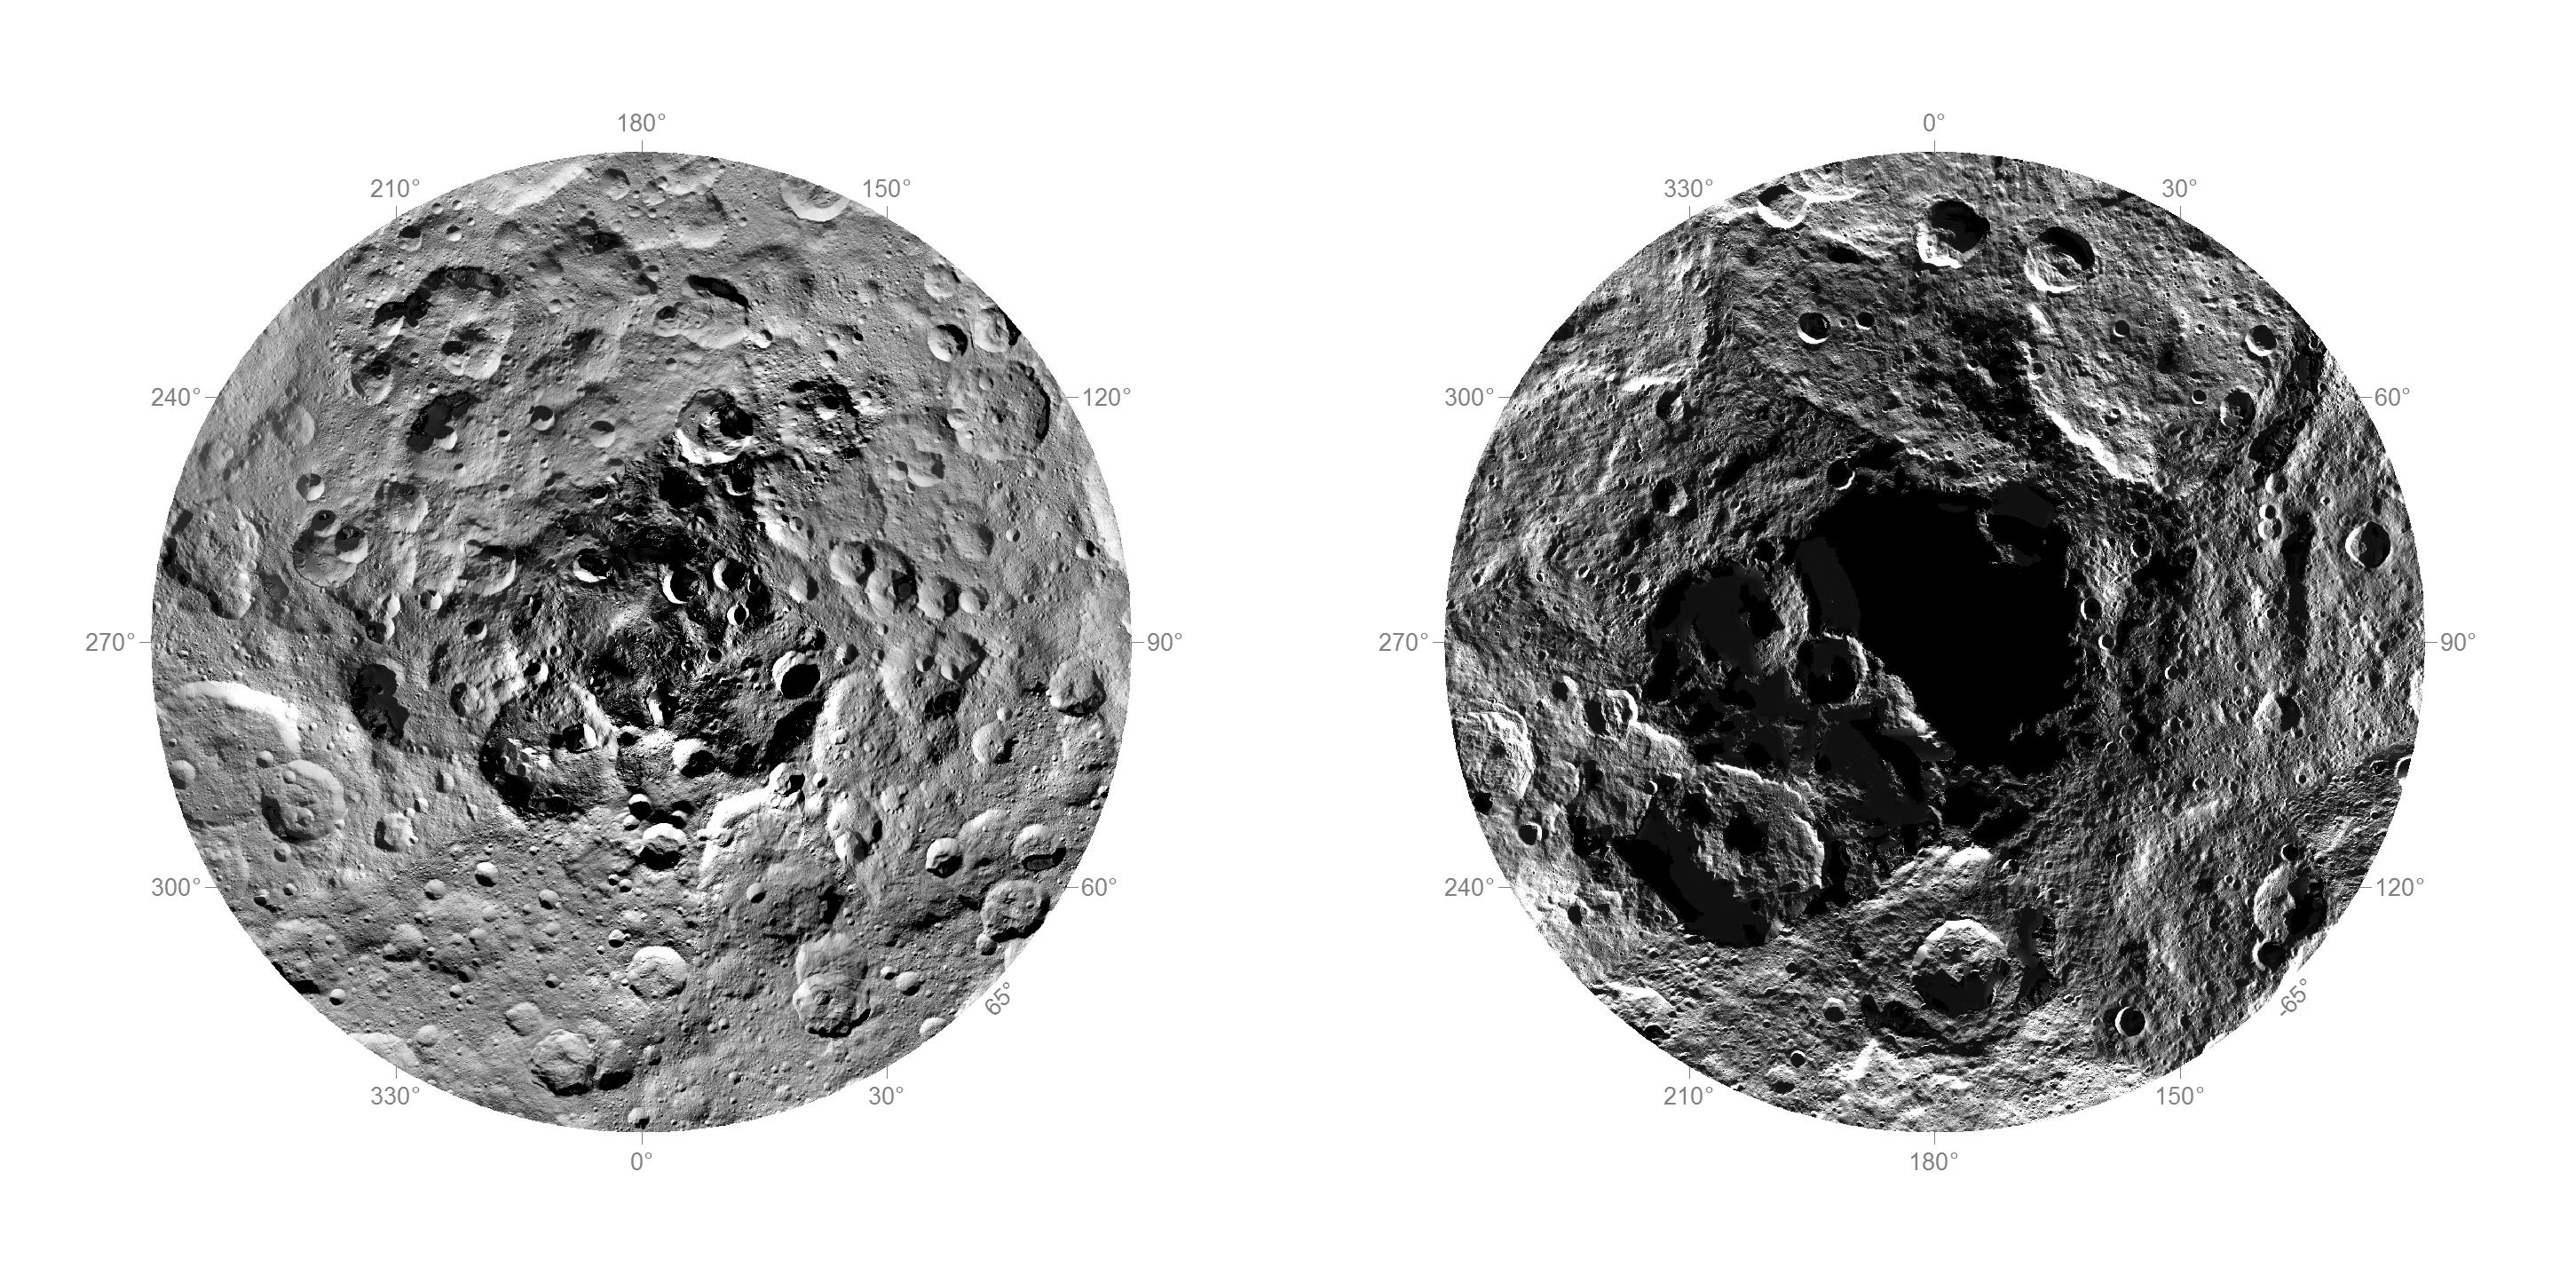 Researchers from NASA's Dawn mission have composed the first comprehensive views of the north (left) and south pole regions (right) of dwarf planet Ceres, using images obtained by the Dawn spacecraft.